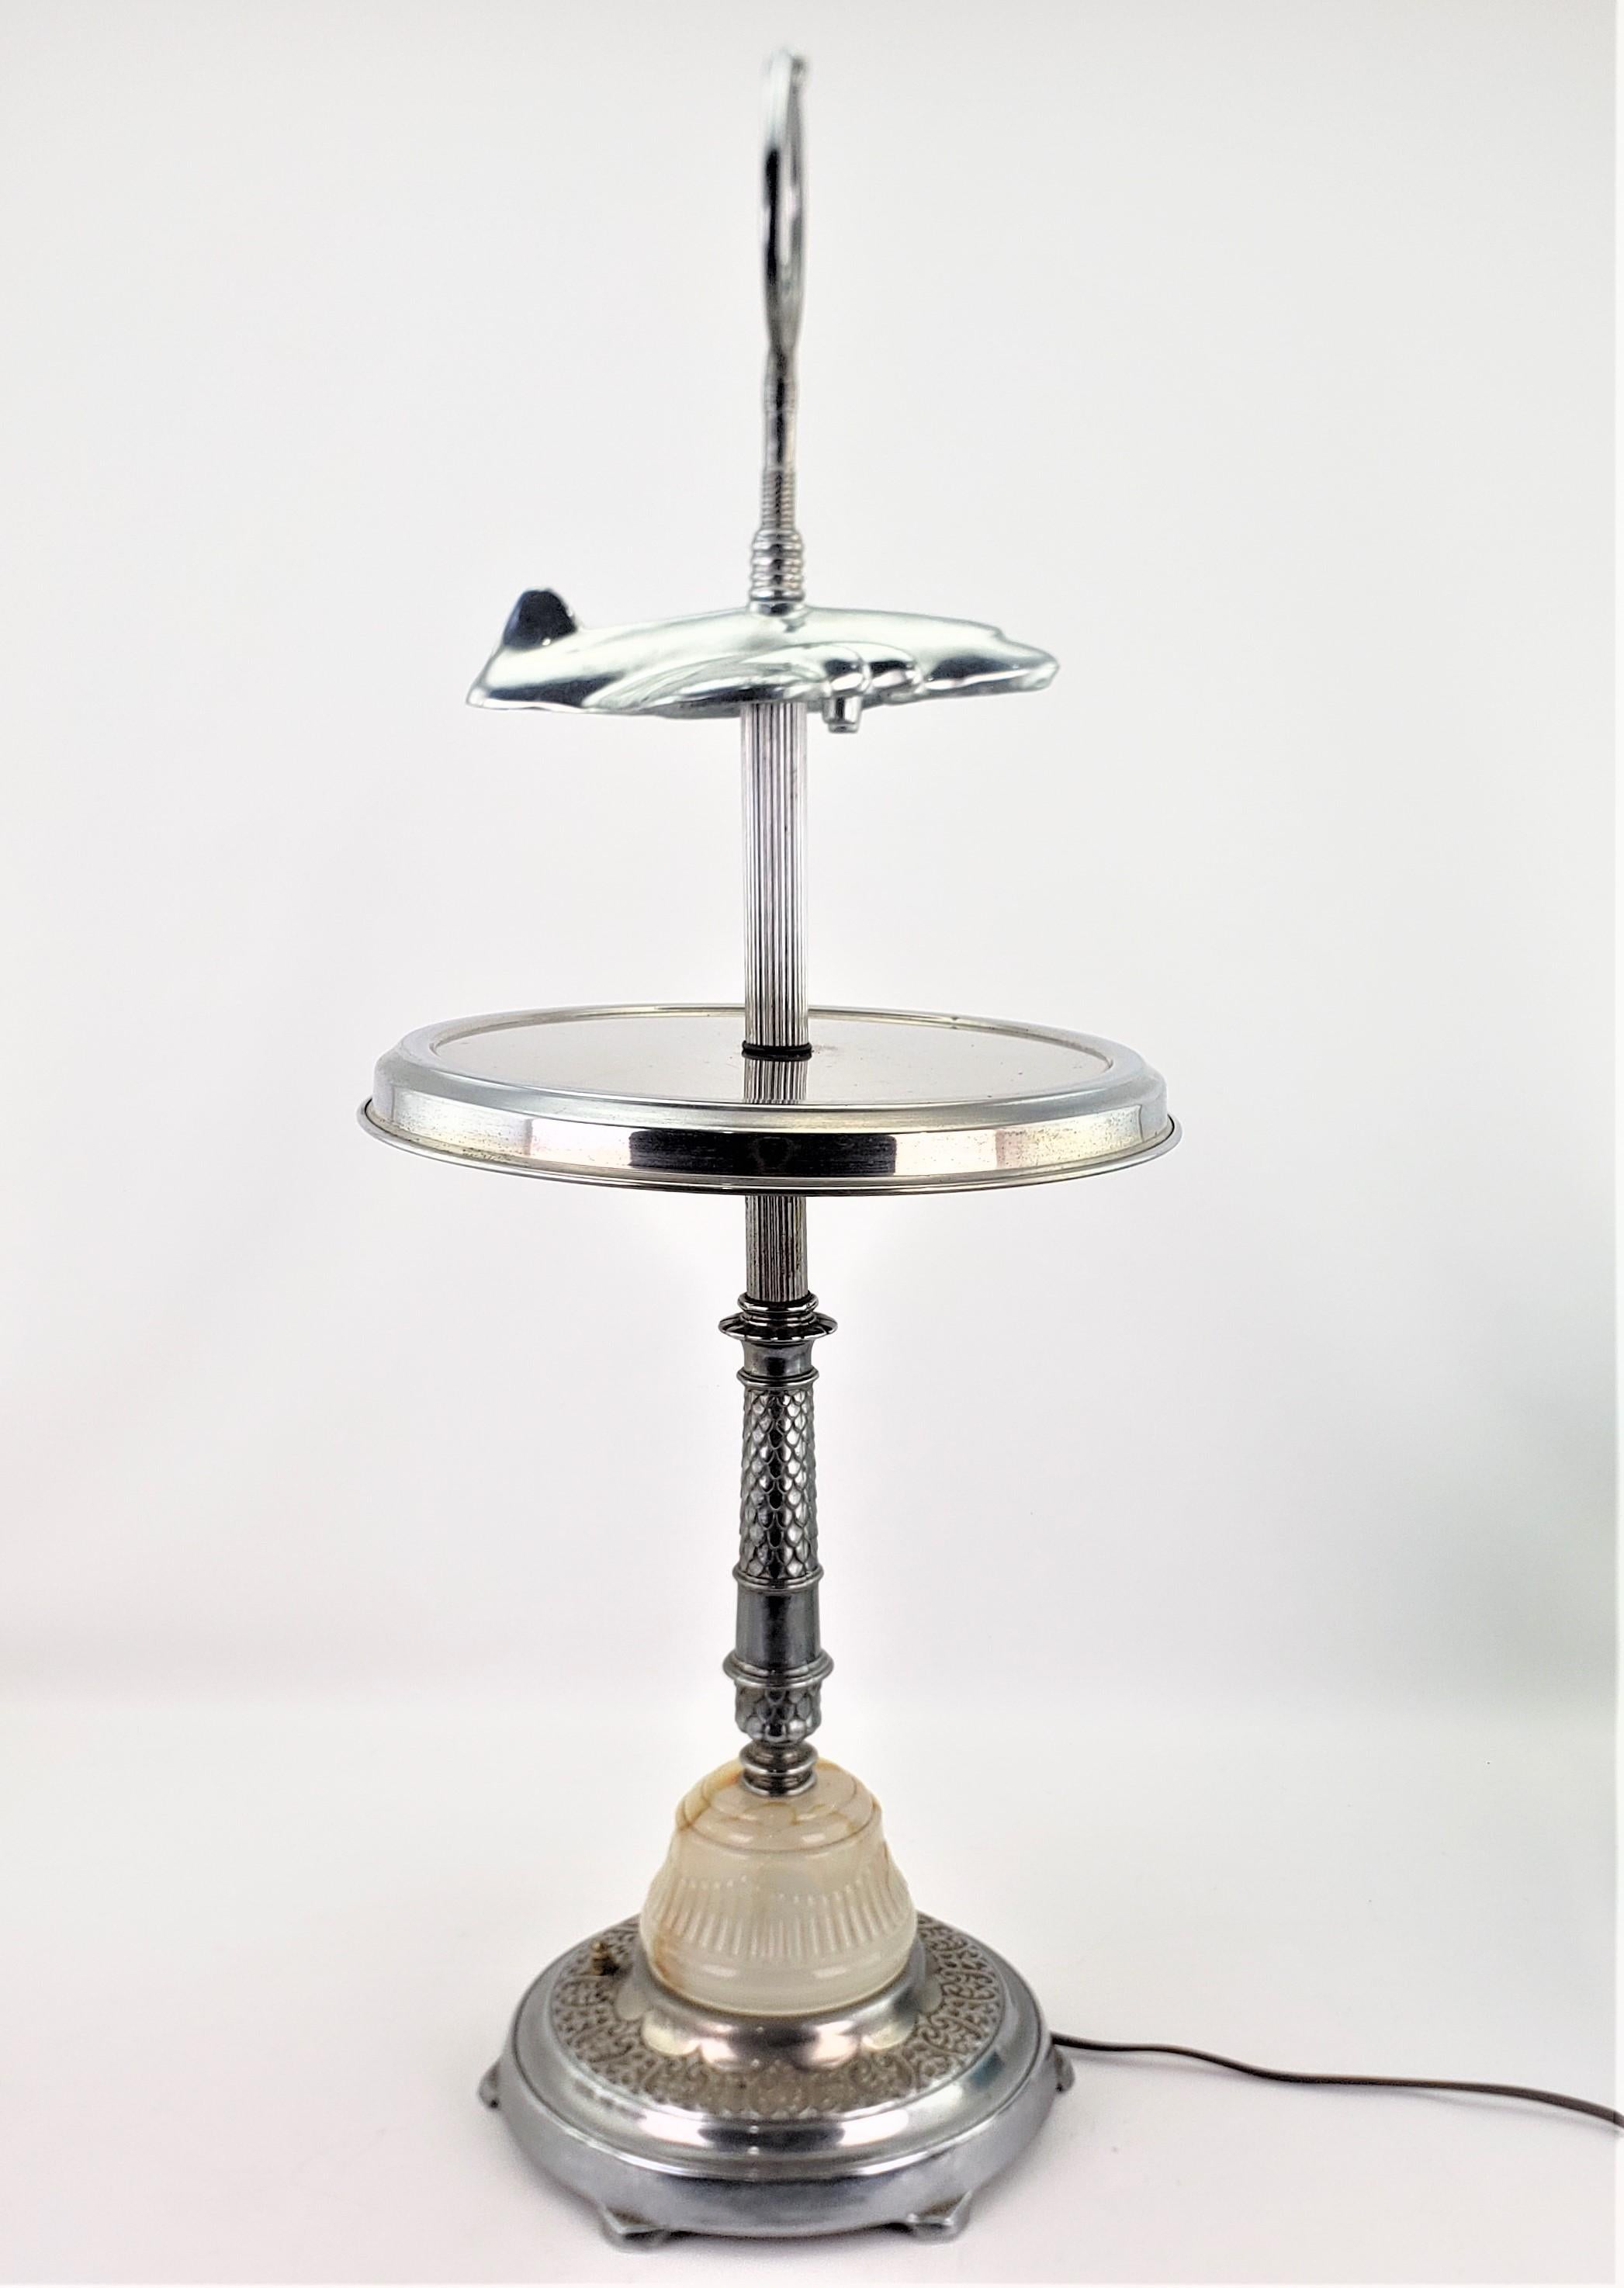 Unique Art Deco Styled Chrome Jet Airplane Lighted Smoker's Stand or Table In Good Condition For Sale In Hamilton, Ontario